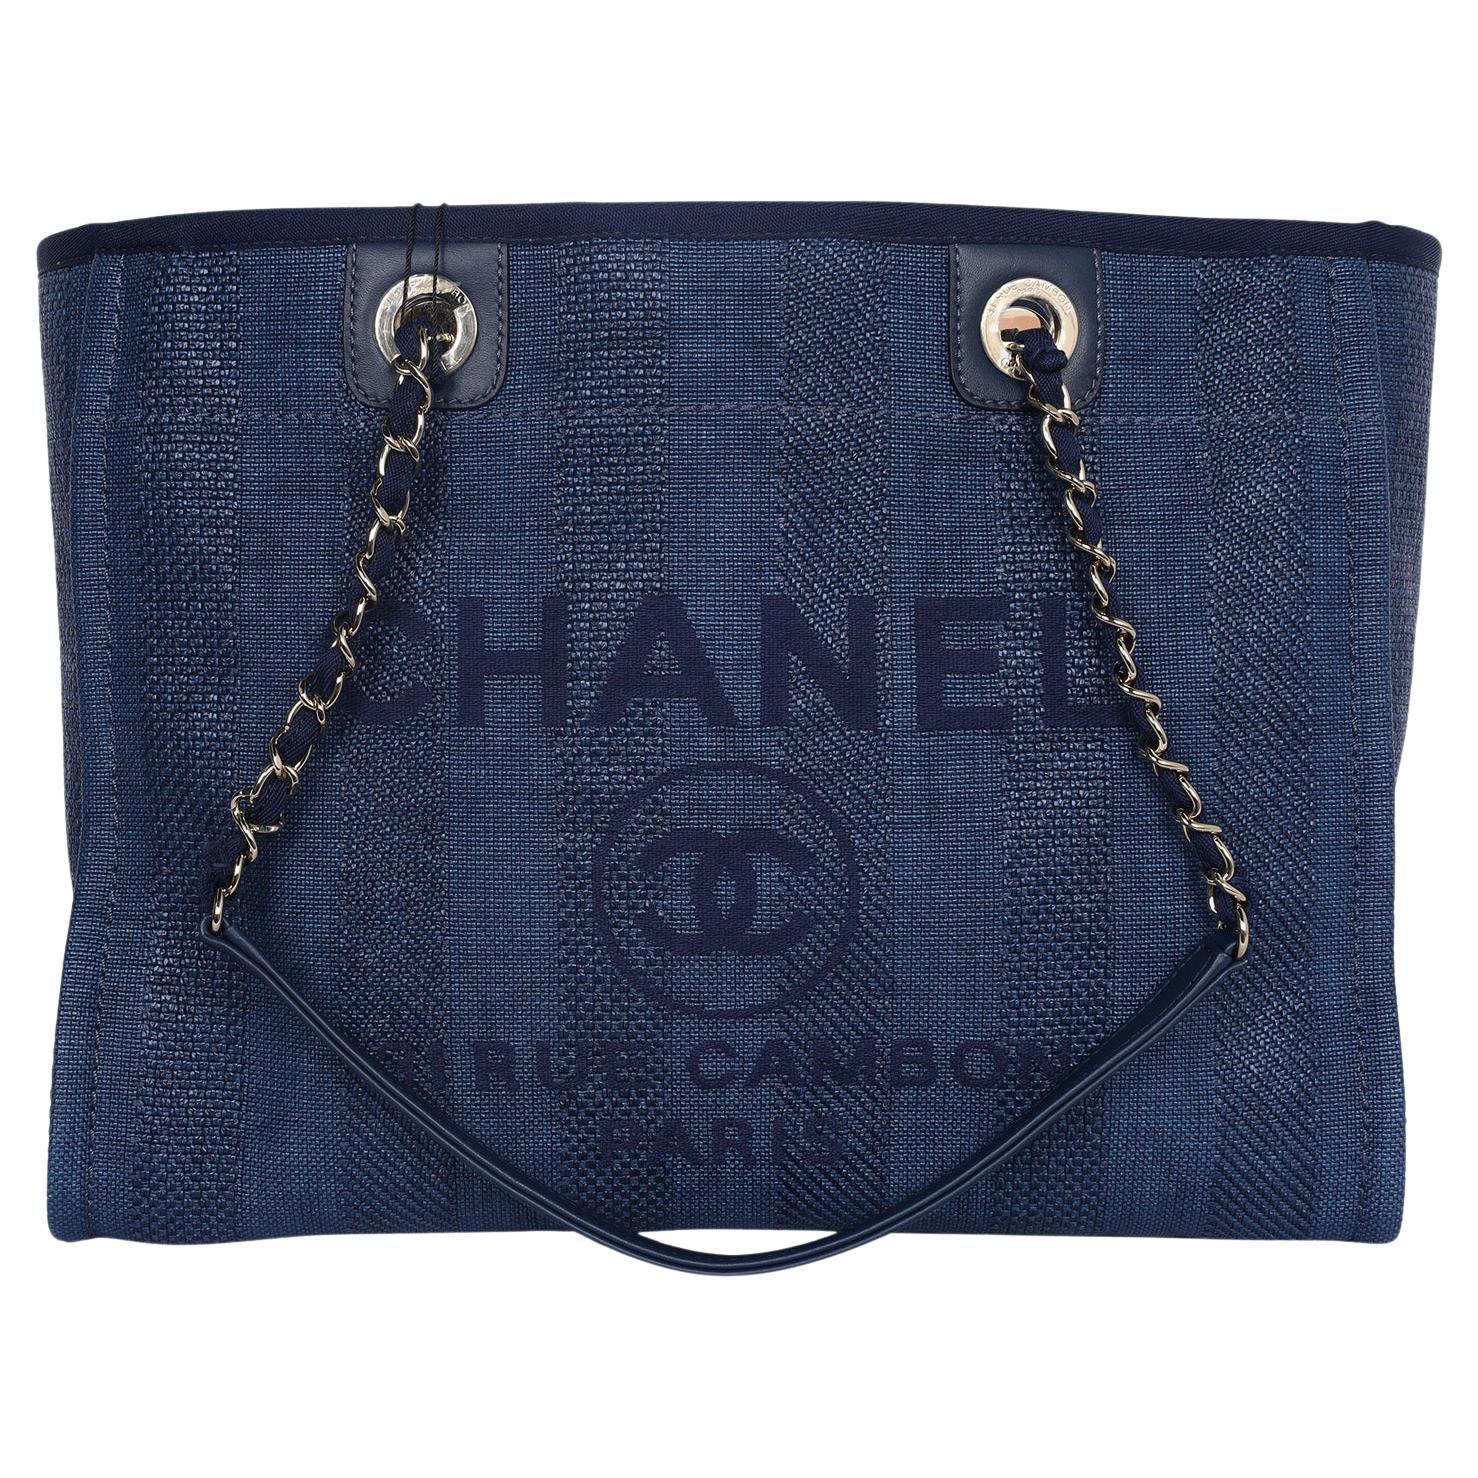 Chanel Blue Striped Mixed Fibers Medium Deauville Shoulder Bag Tote Navy 2019 For Sale